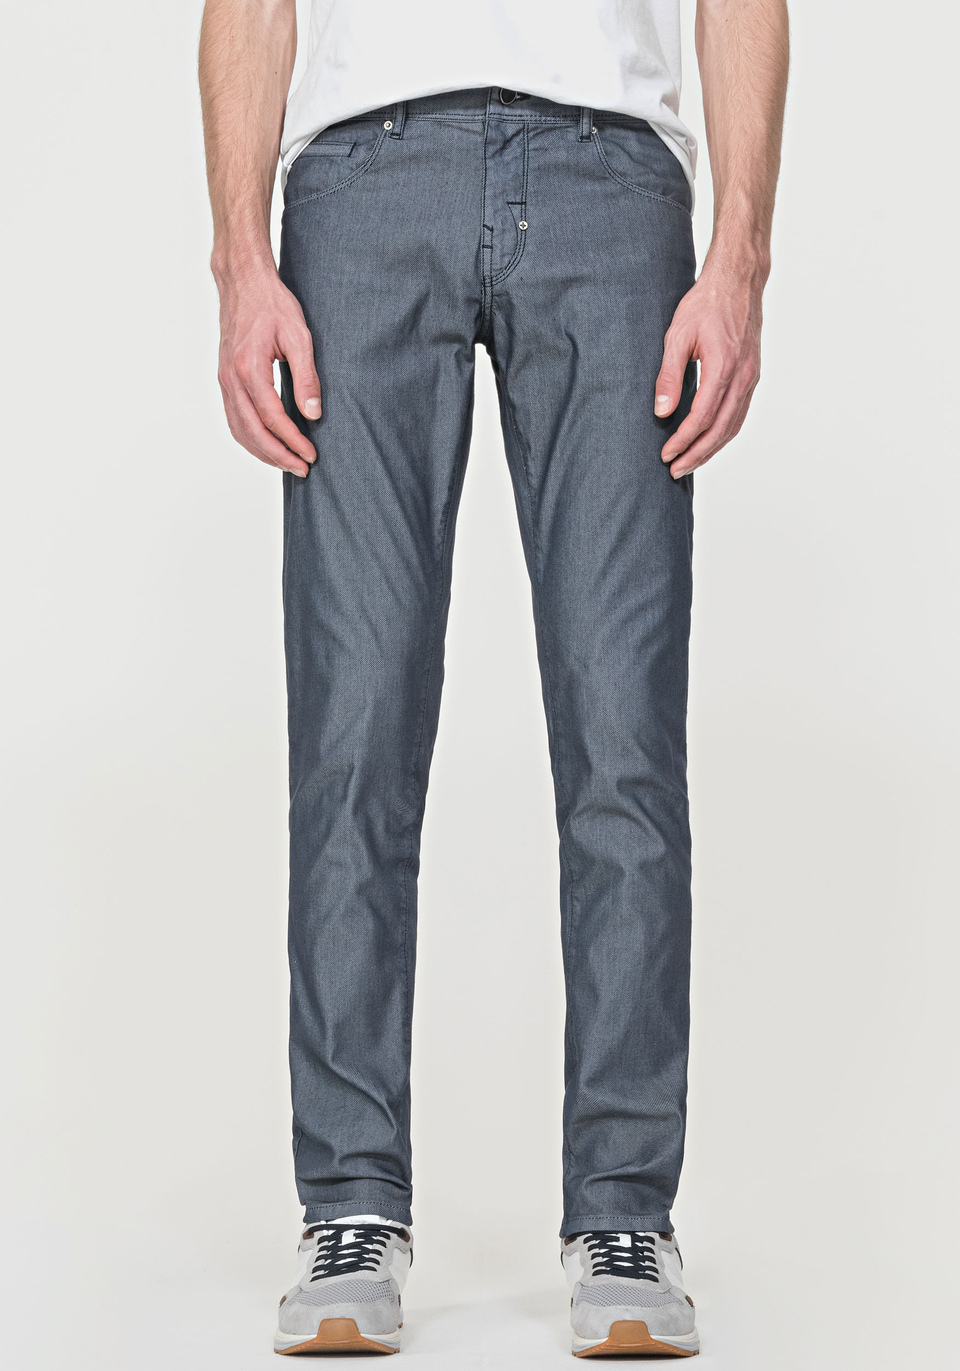 “BARRET” SKINNY-FIT TROUSERS IN STRETCH COTTON BLEND - Antony Morato Online Shop